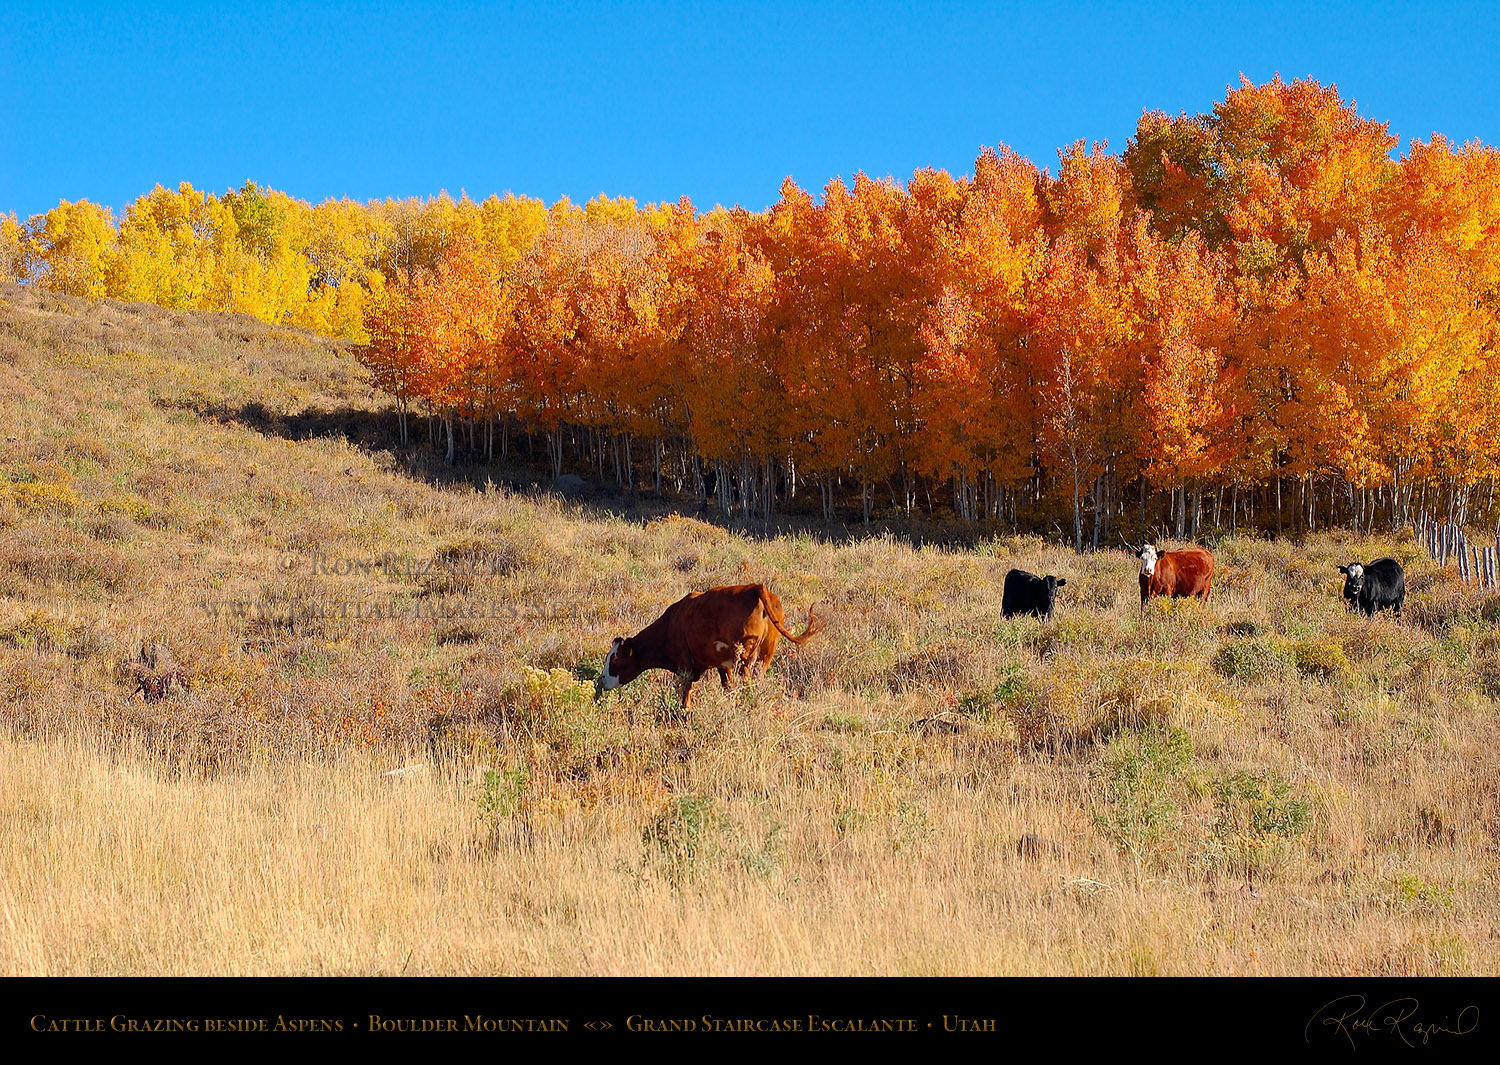 utah scenic collection direct link to the aspens and utah scenic ...